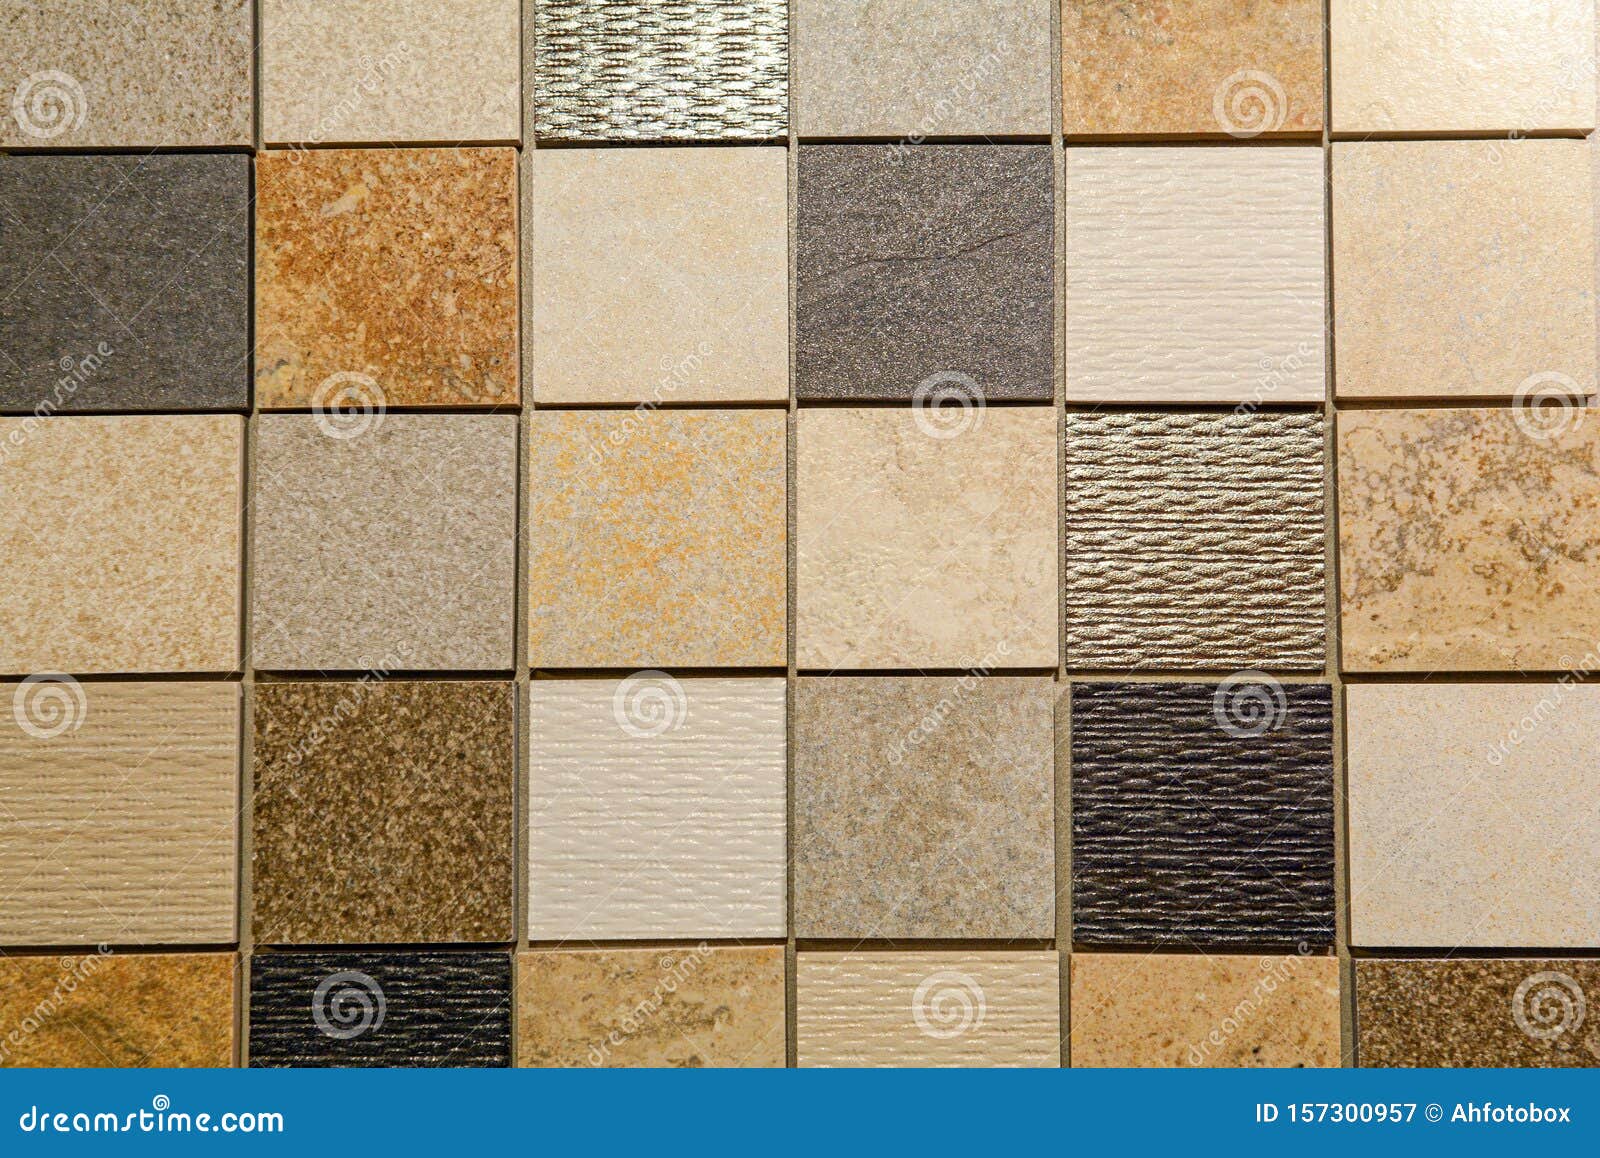 Material Pattern With Tiles And Natural Stone For Bathroom And Kitchen Flooring And Wall